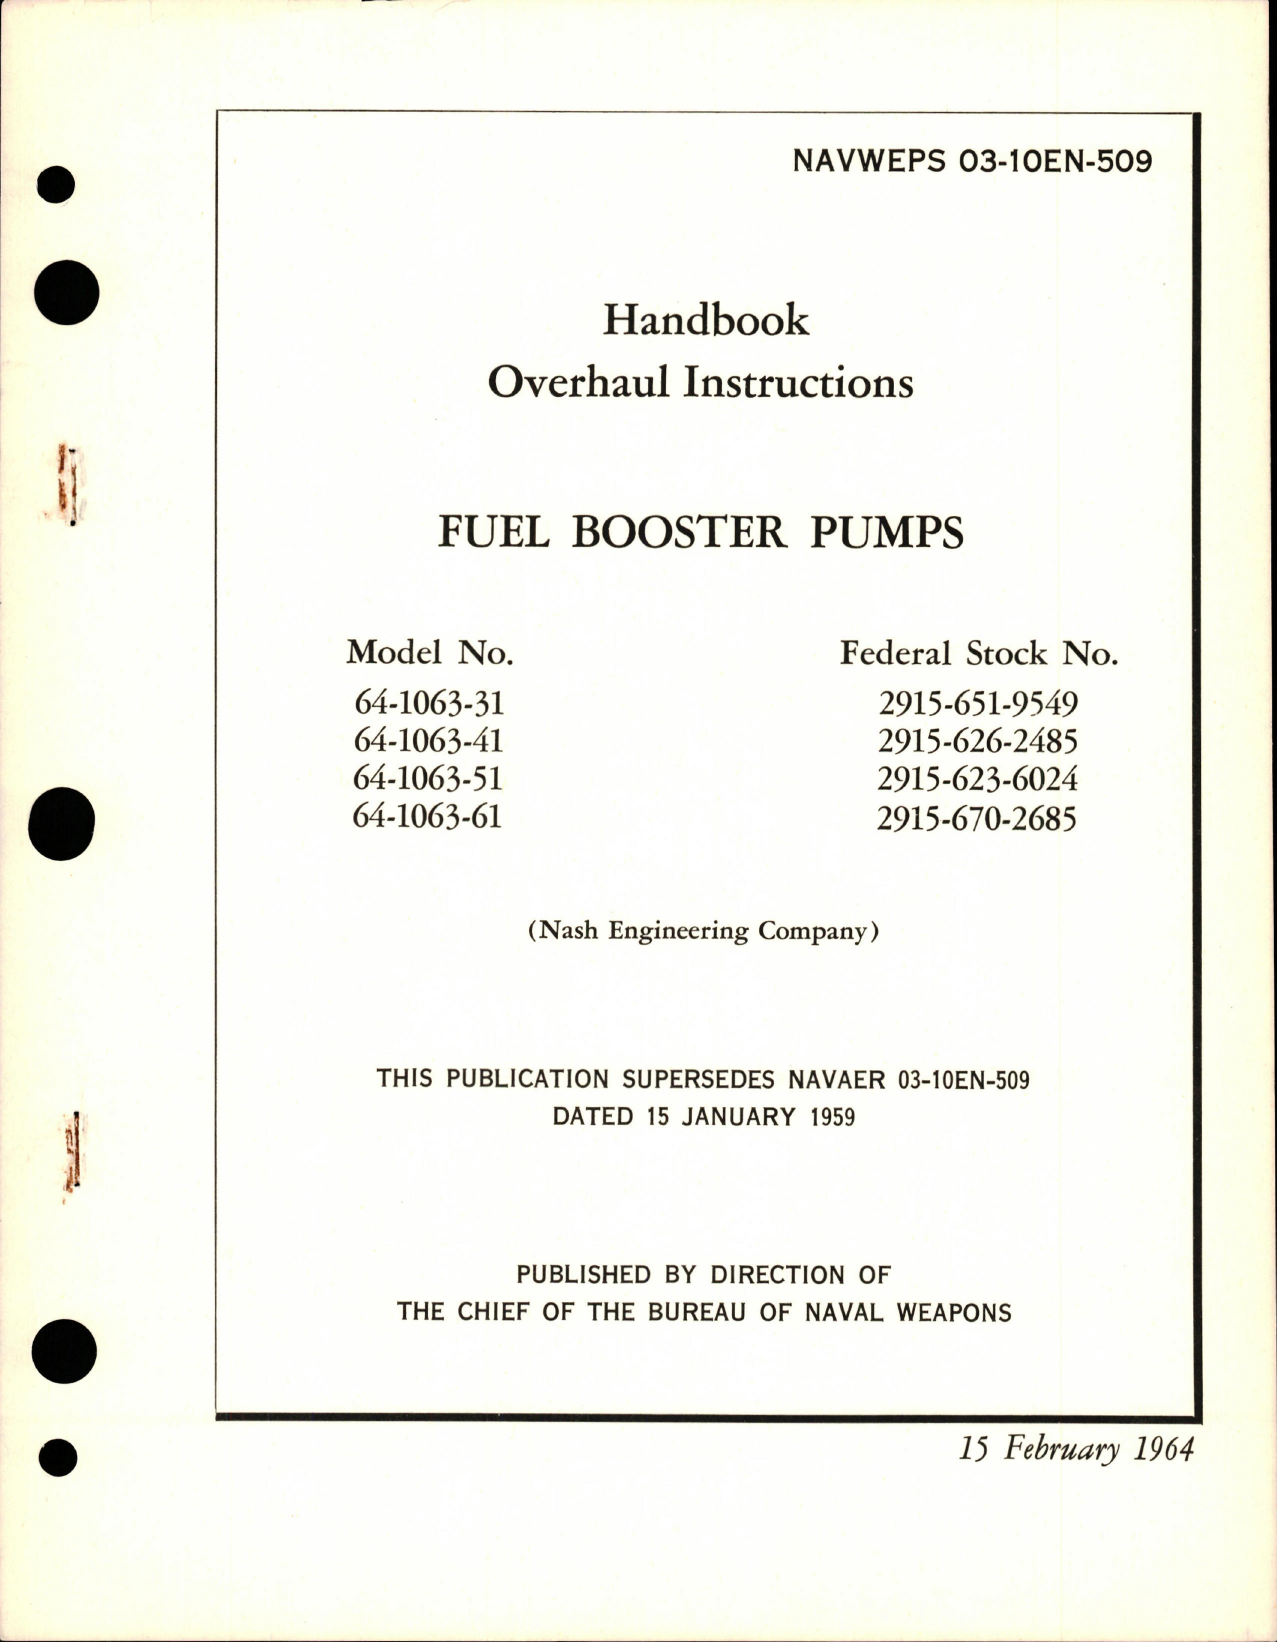 Sample page 1 from AirCorps Library document: Overhaul Instructions for Fuel Booster Pumps